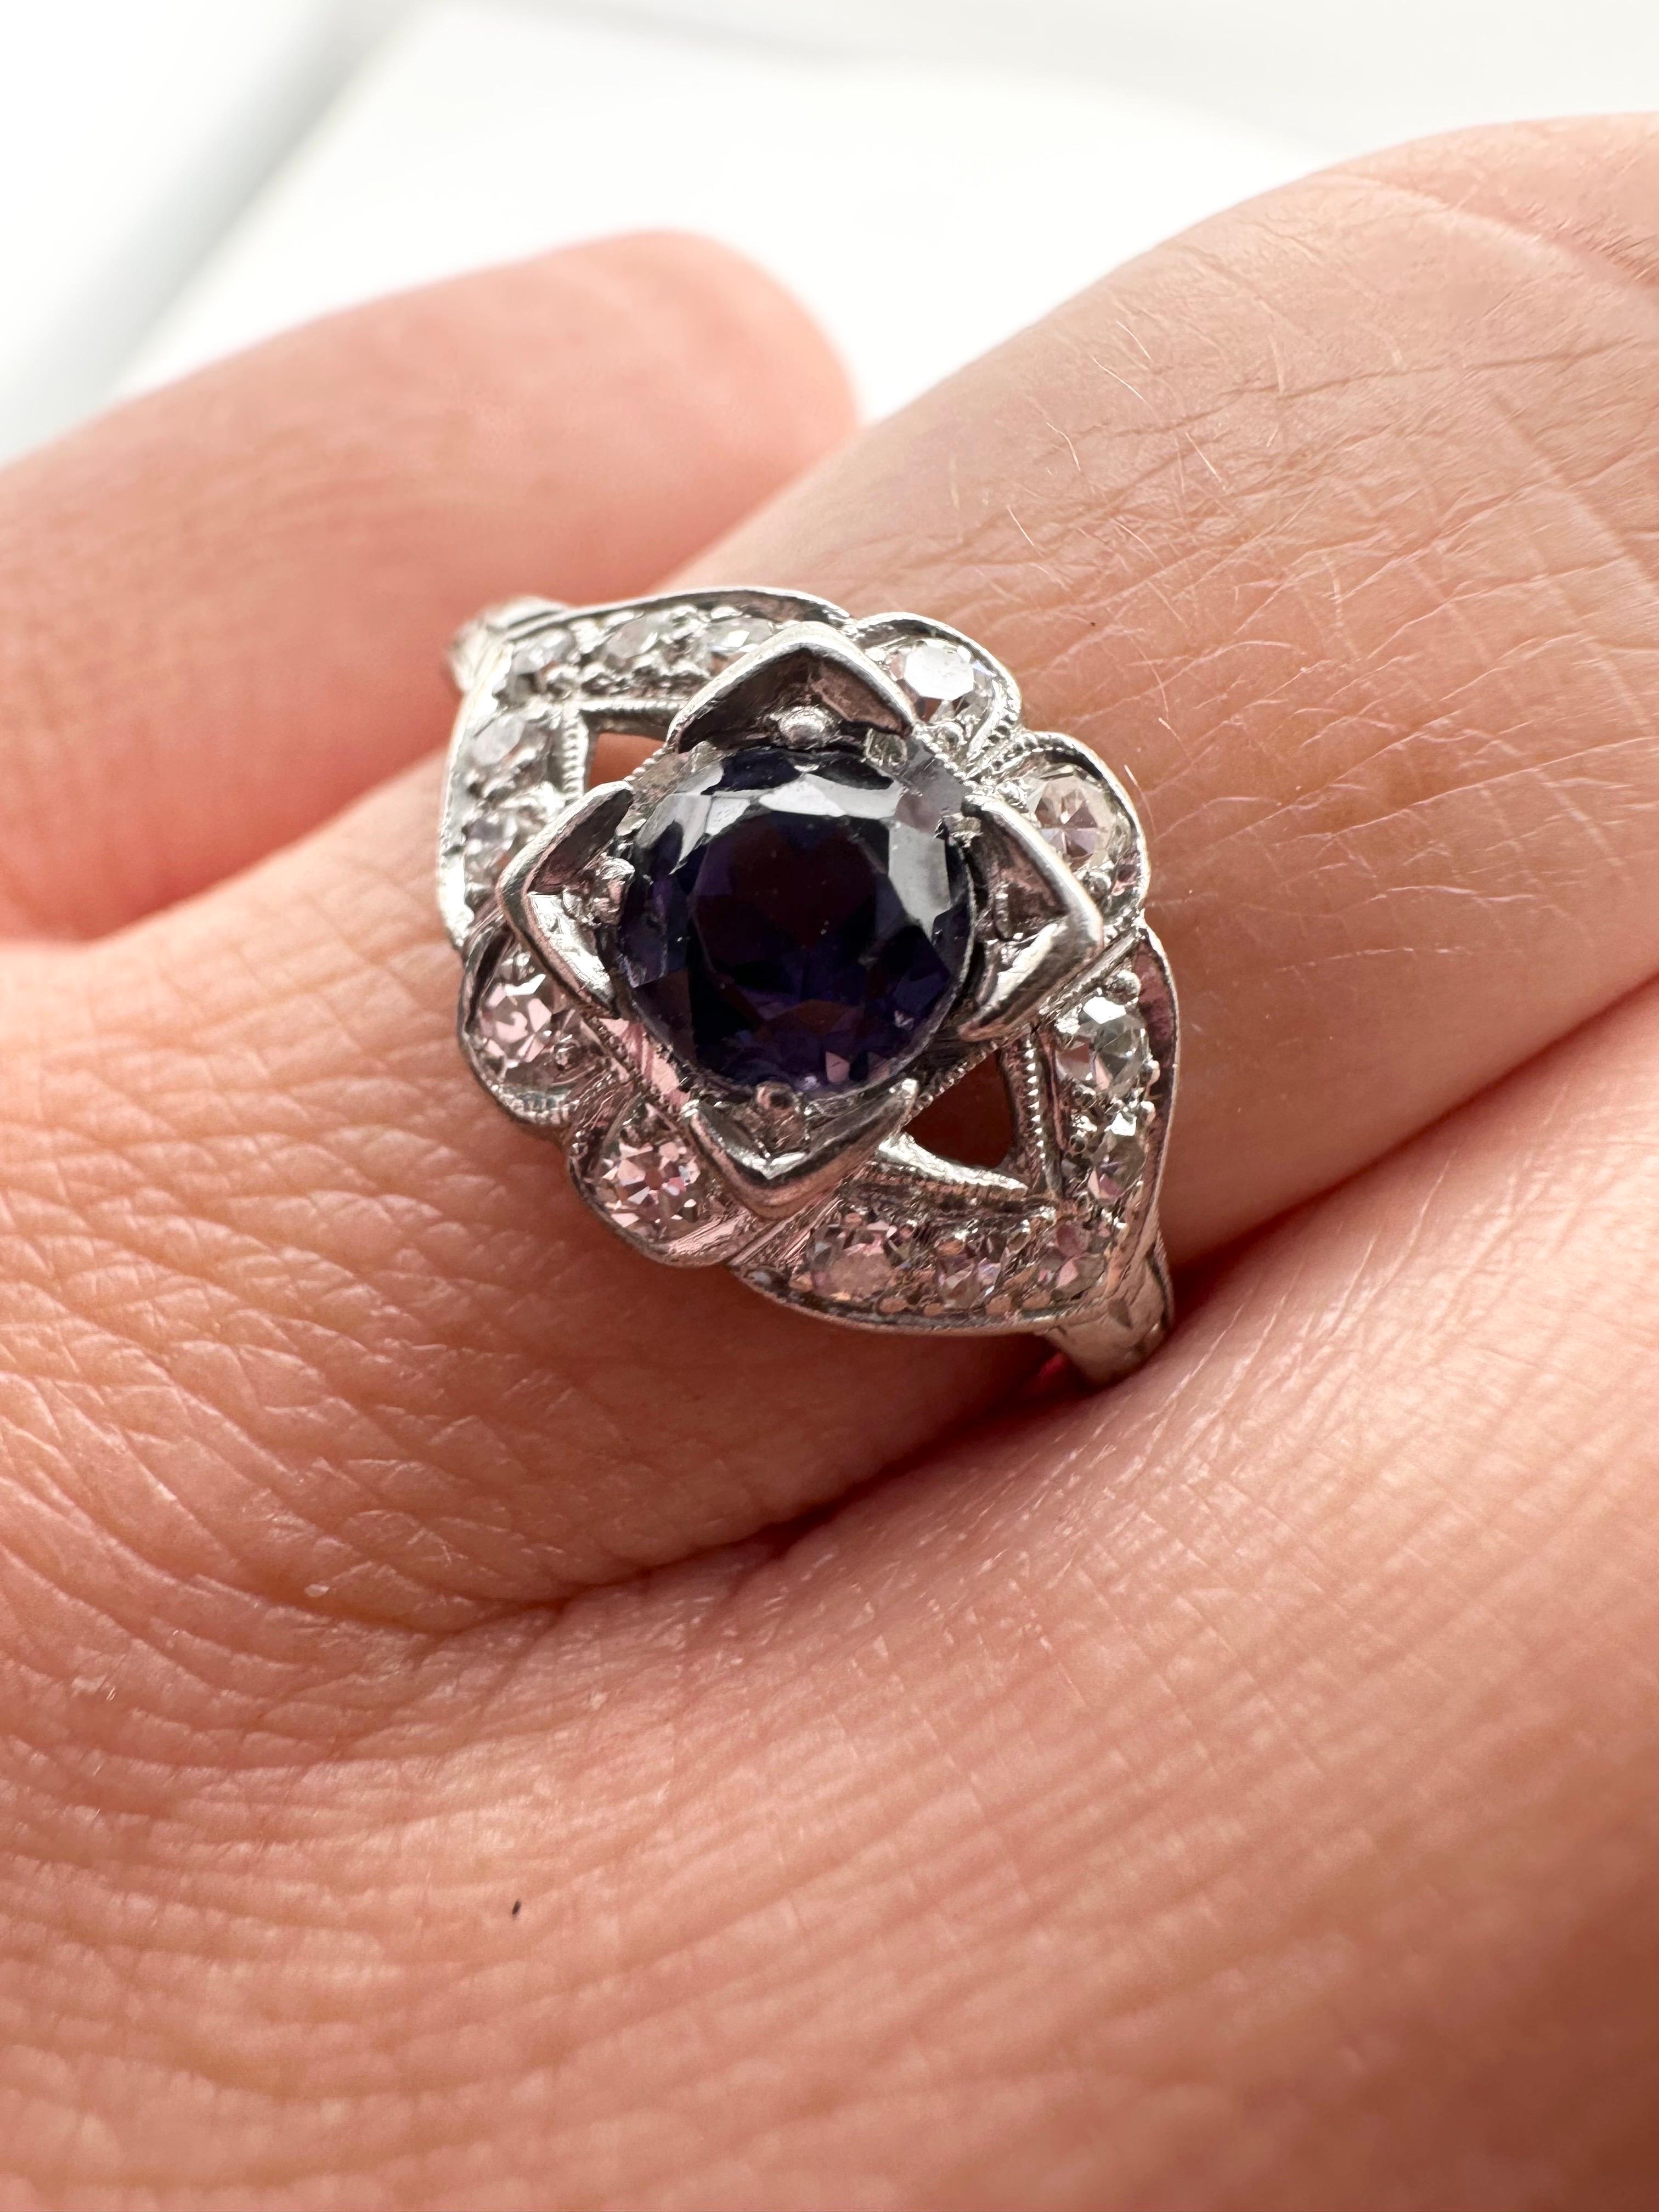 Tanzanite engagement ring in platinum with diamonds, beautiful vintage ring with antique diamonds, made in size 7.25 but can be adjusted to a different size. Very feminine ring with classical feel made in platinum!

Metal Type: platinum
Gram